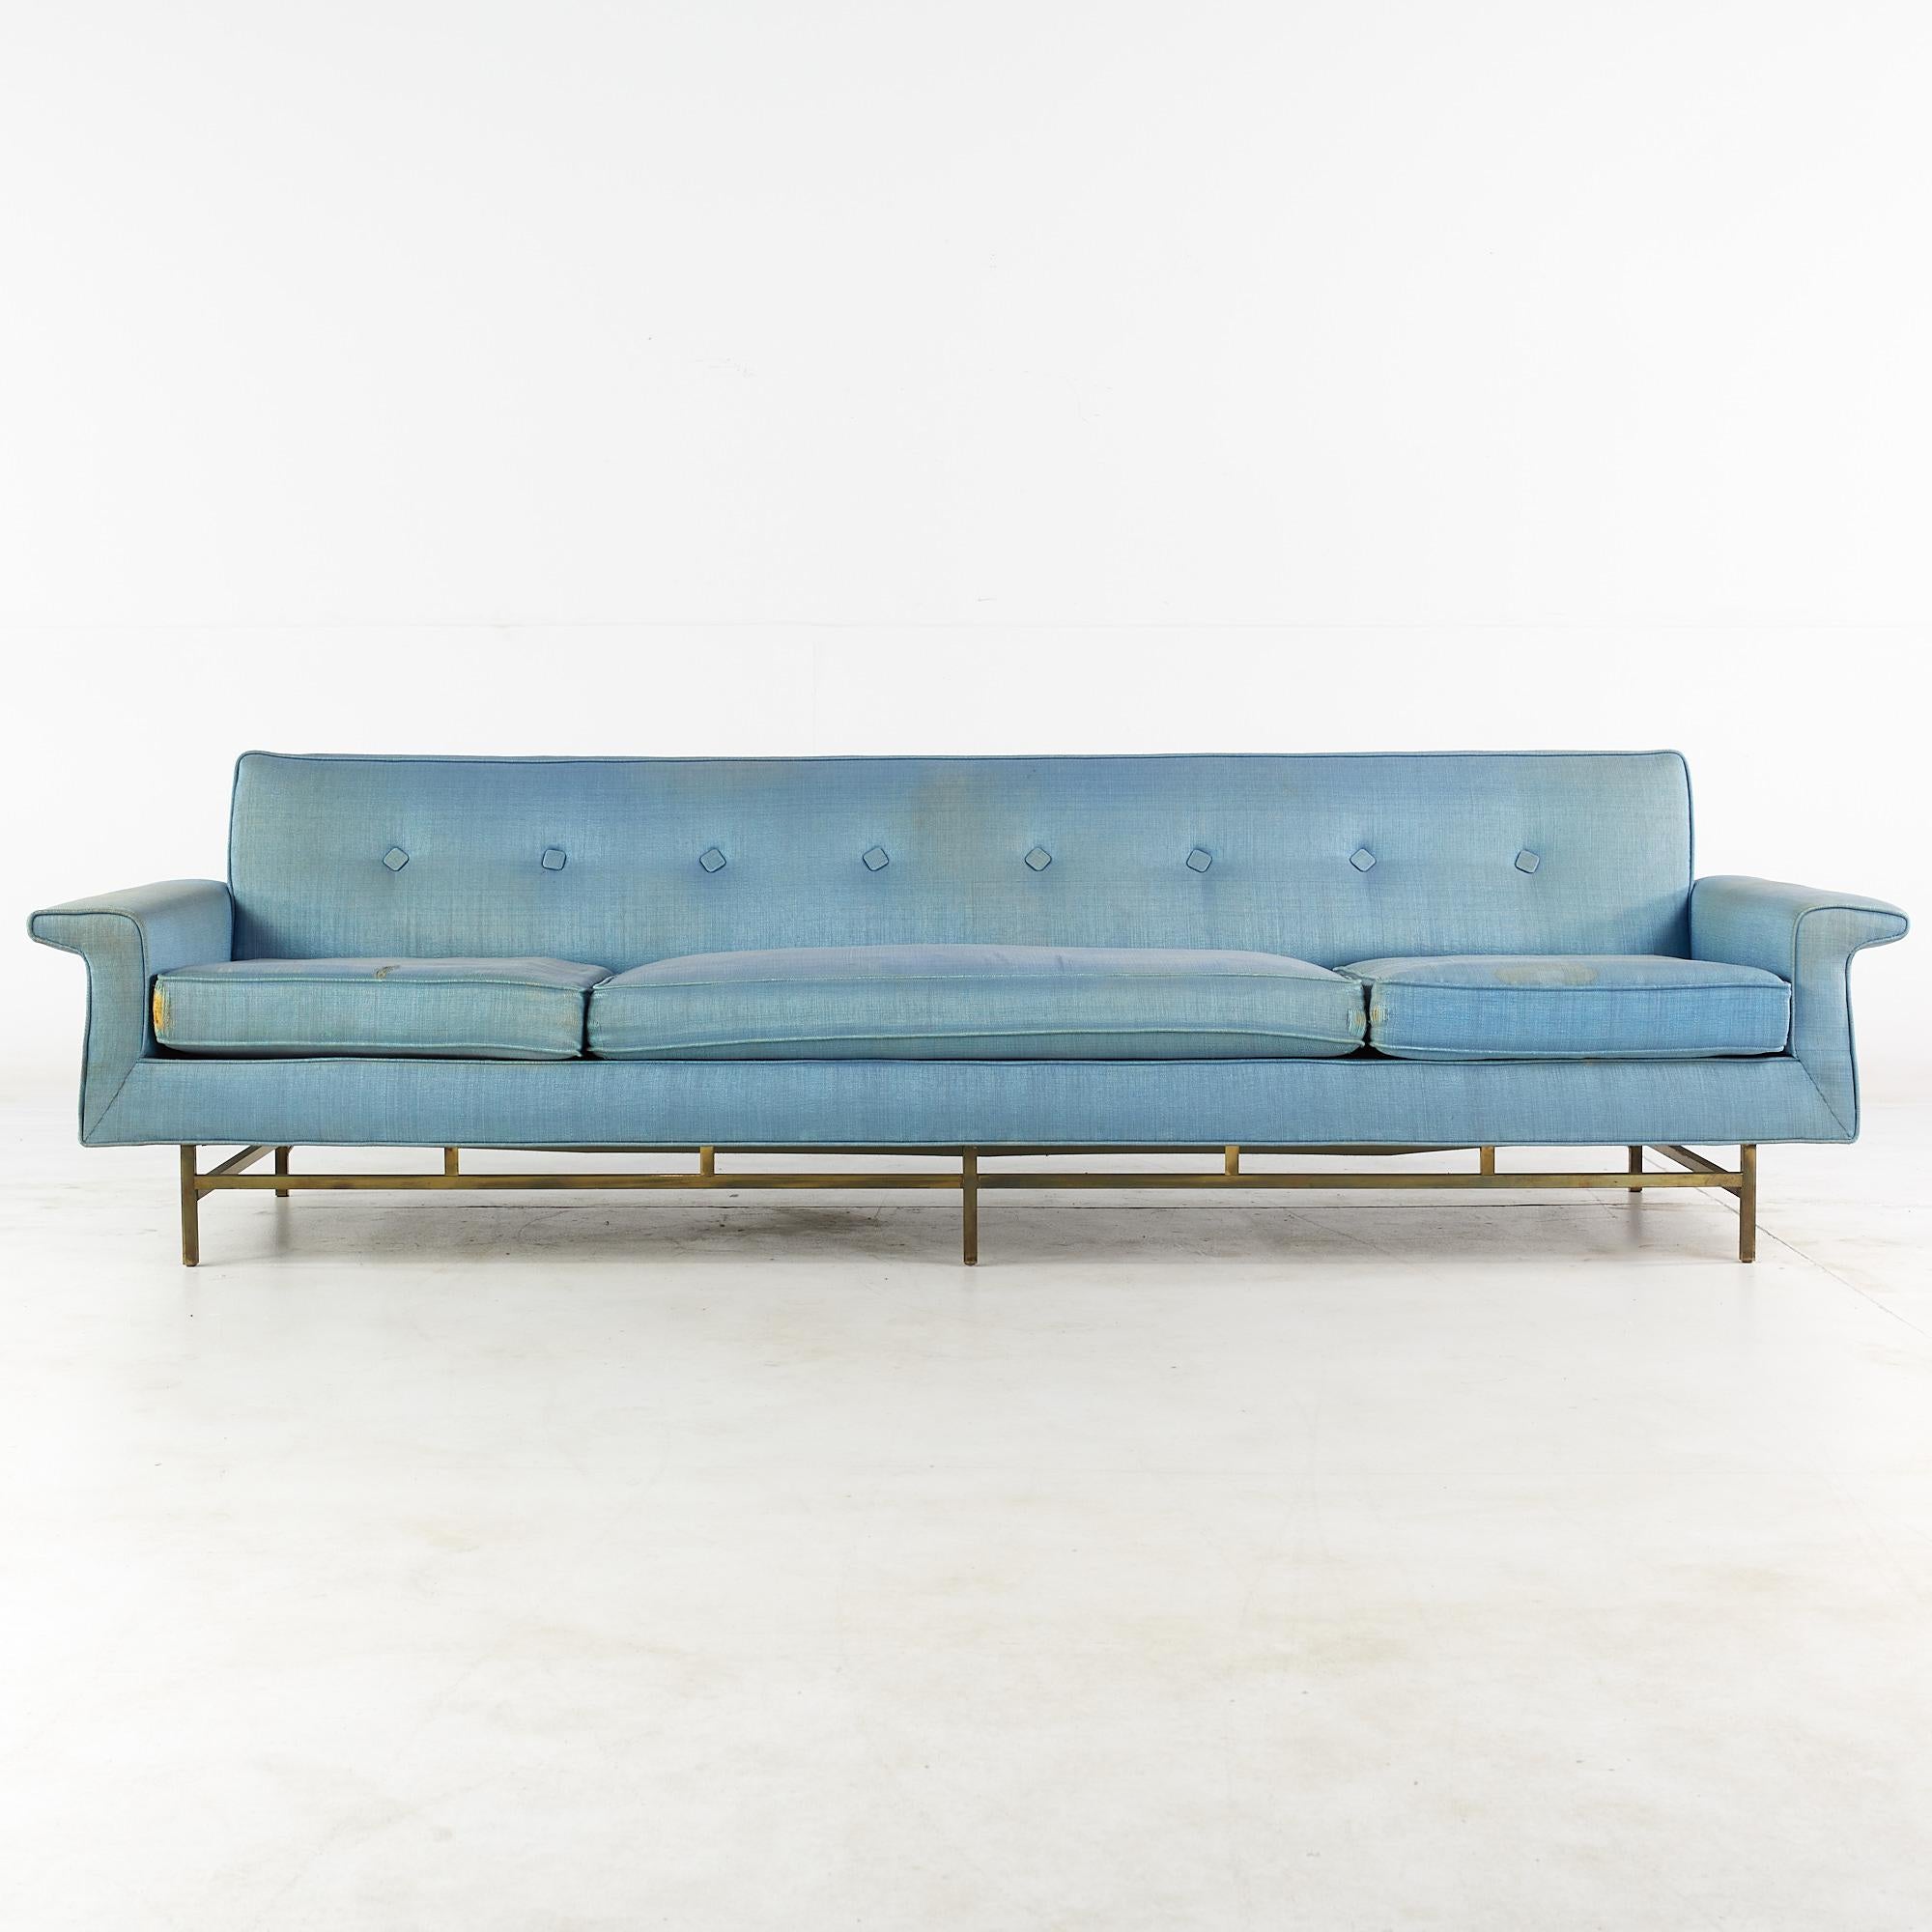 Ben Seibel for stand built furniture midcentury brass base sofa.

This sofa measures: 102 wide x 32 deep x 27 inches high, with a seat height of 16 and arm height of 19.75 inches

Ready for new upholstery. This service is available for an